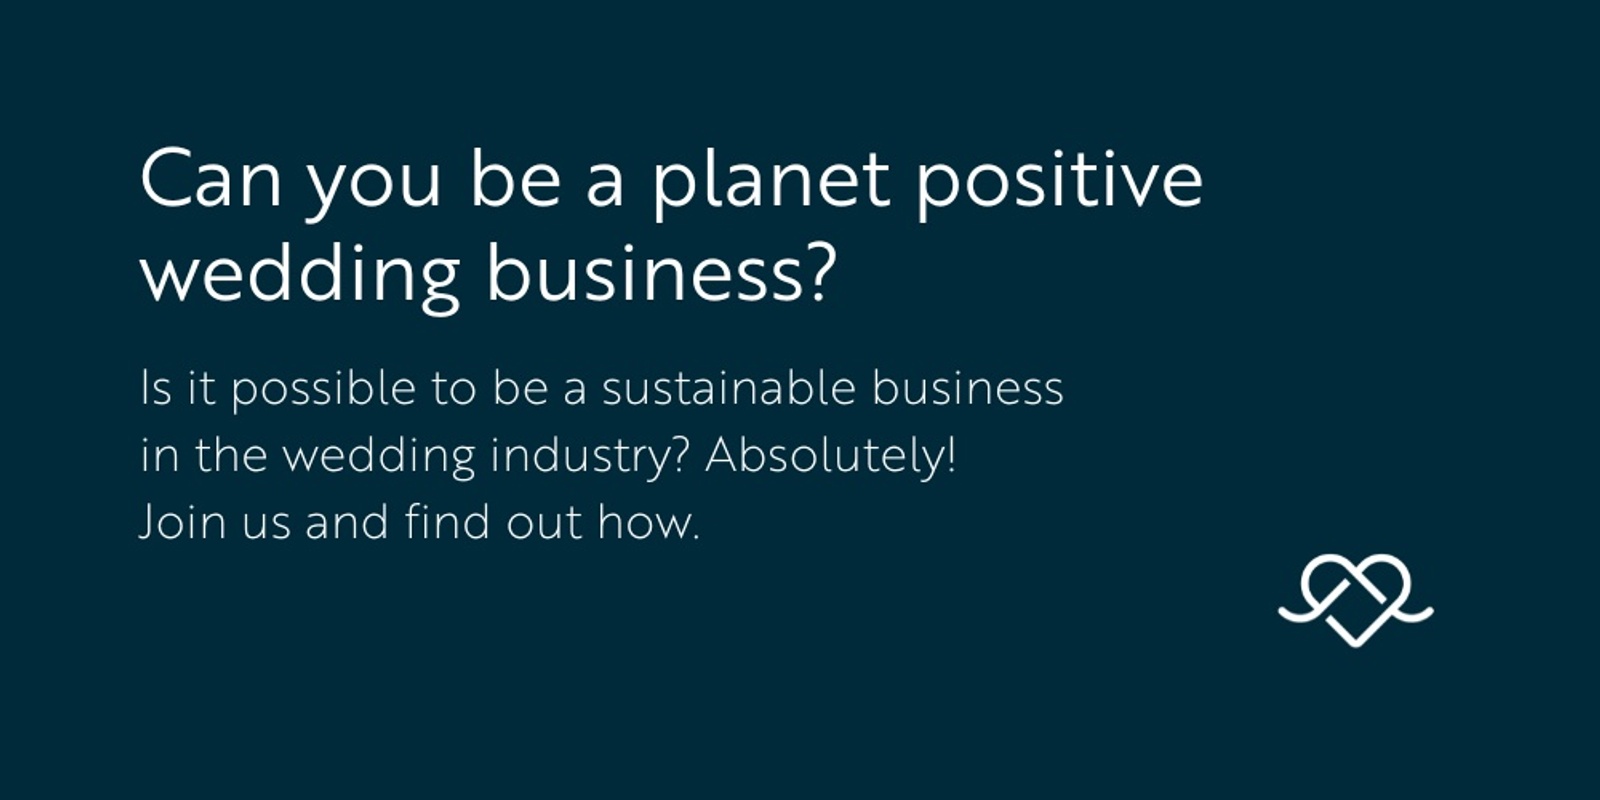 Can you be a planet positive wedding business?